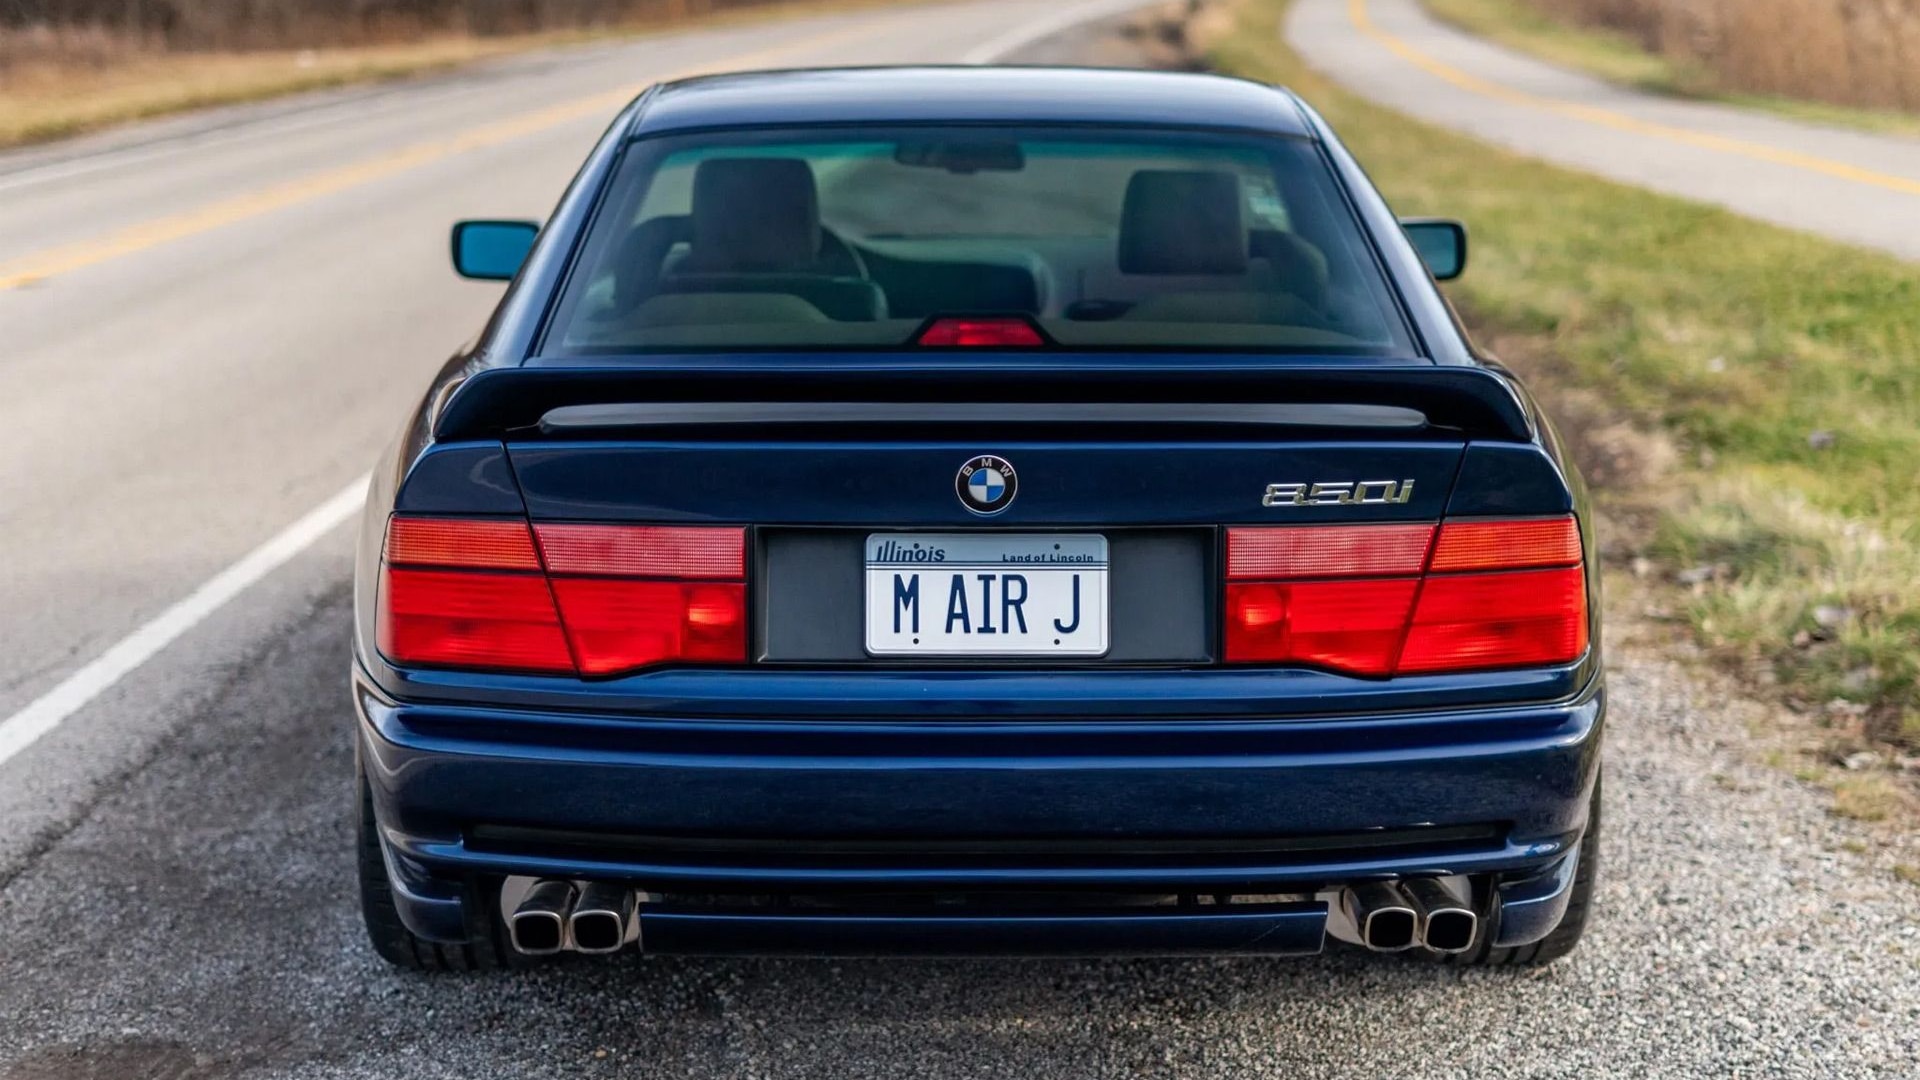 1991 BMW 850i thought to have been owned by Michael Jordan - Photo credit: Bring a Trailer